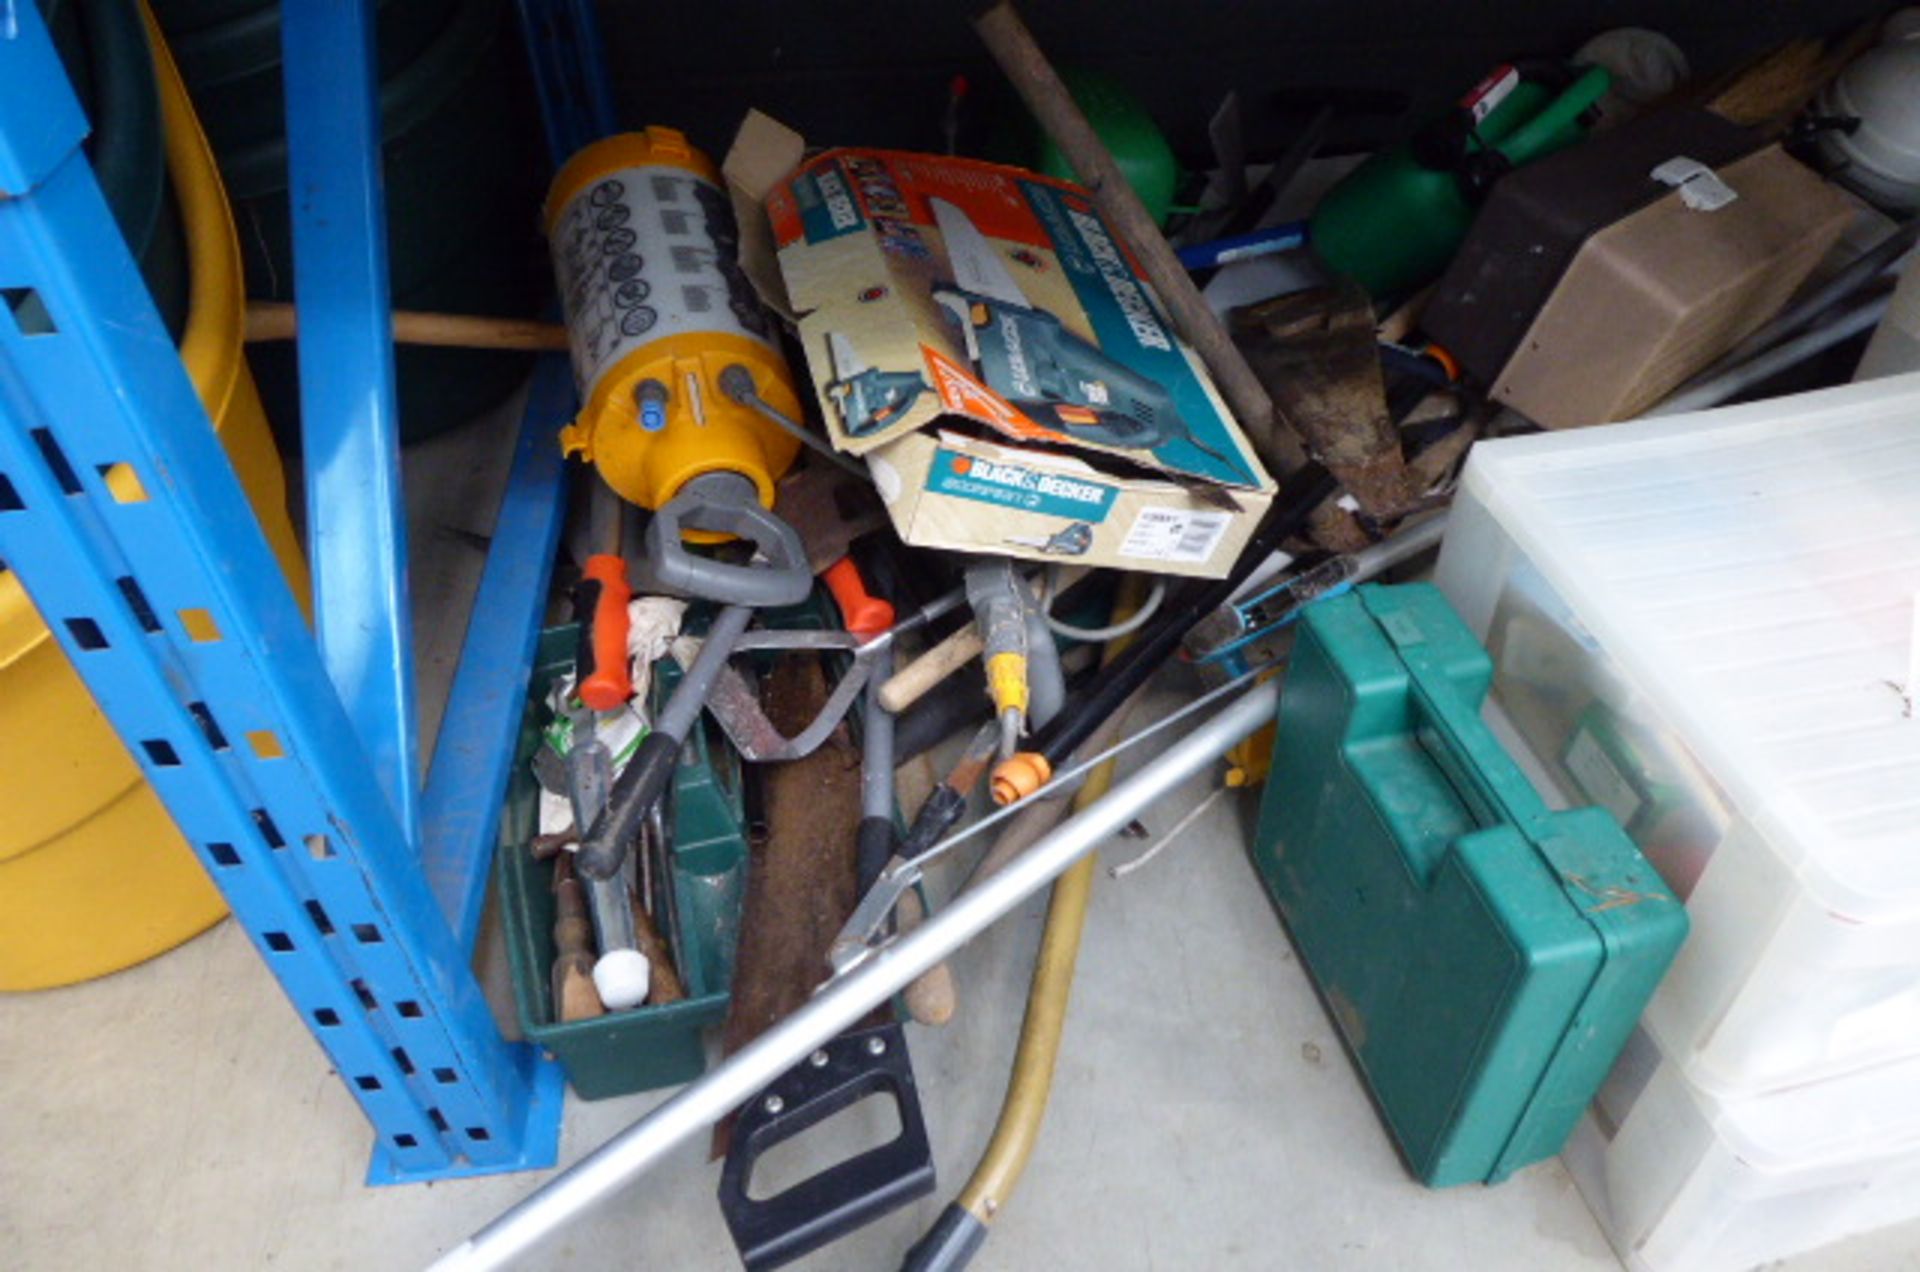 Large under bay of assorted tools inc. sprayer, Scorpion saw, saws, hedge cutters, tool boxes, - Image 5 of 5